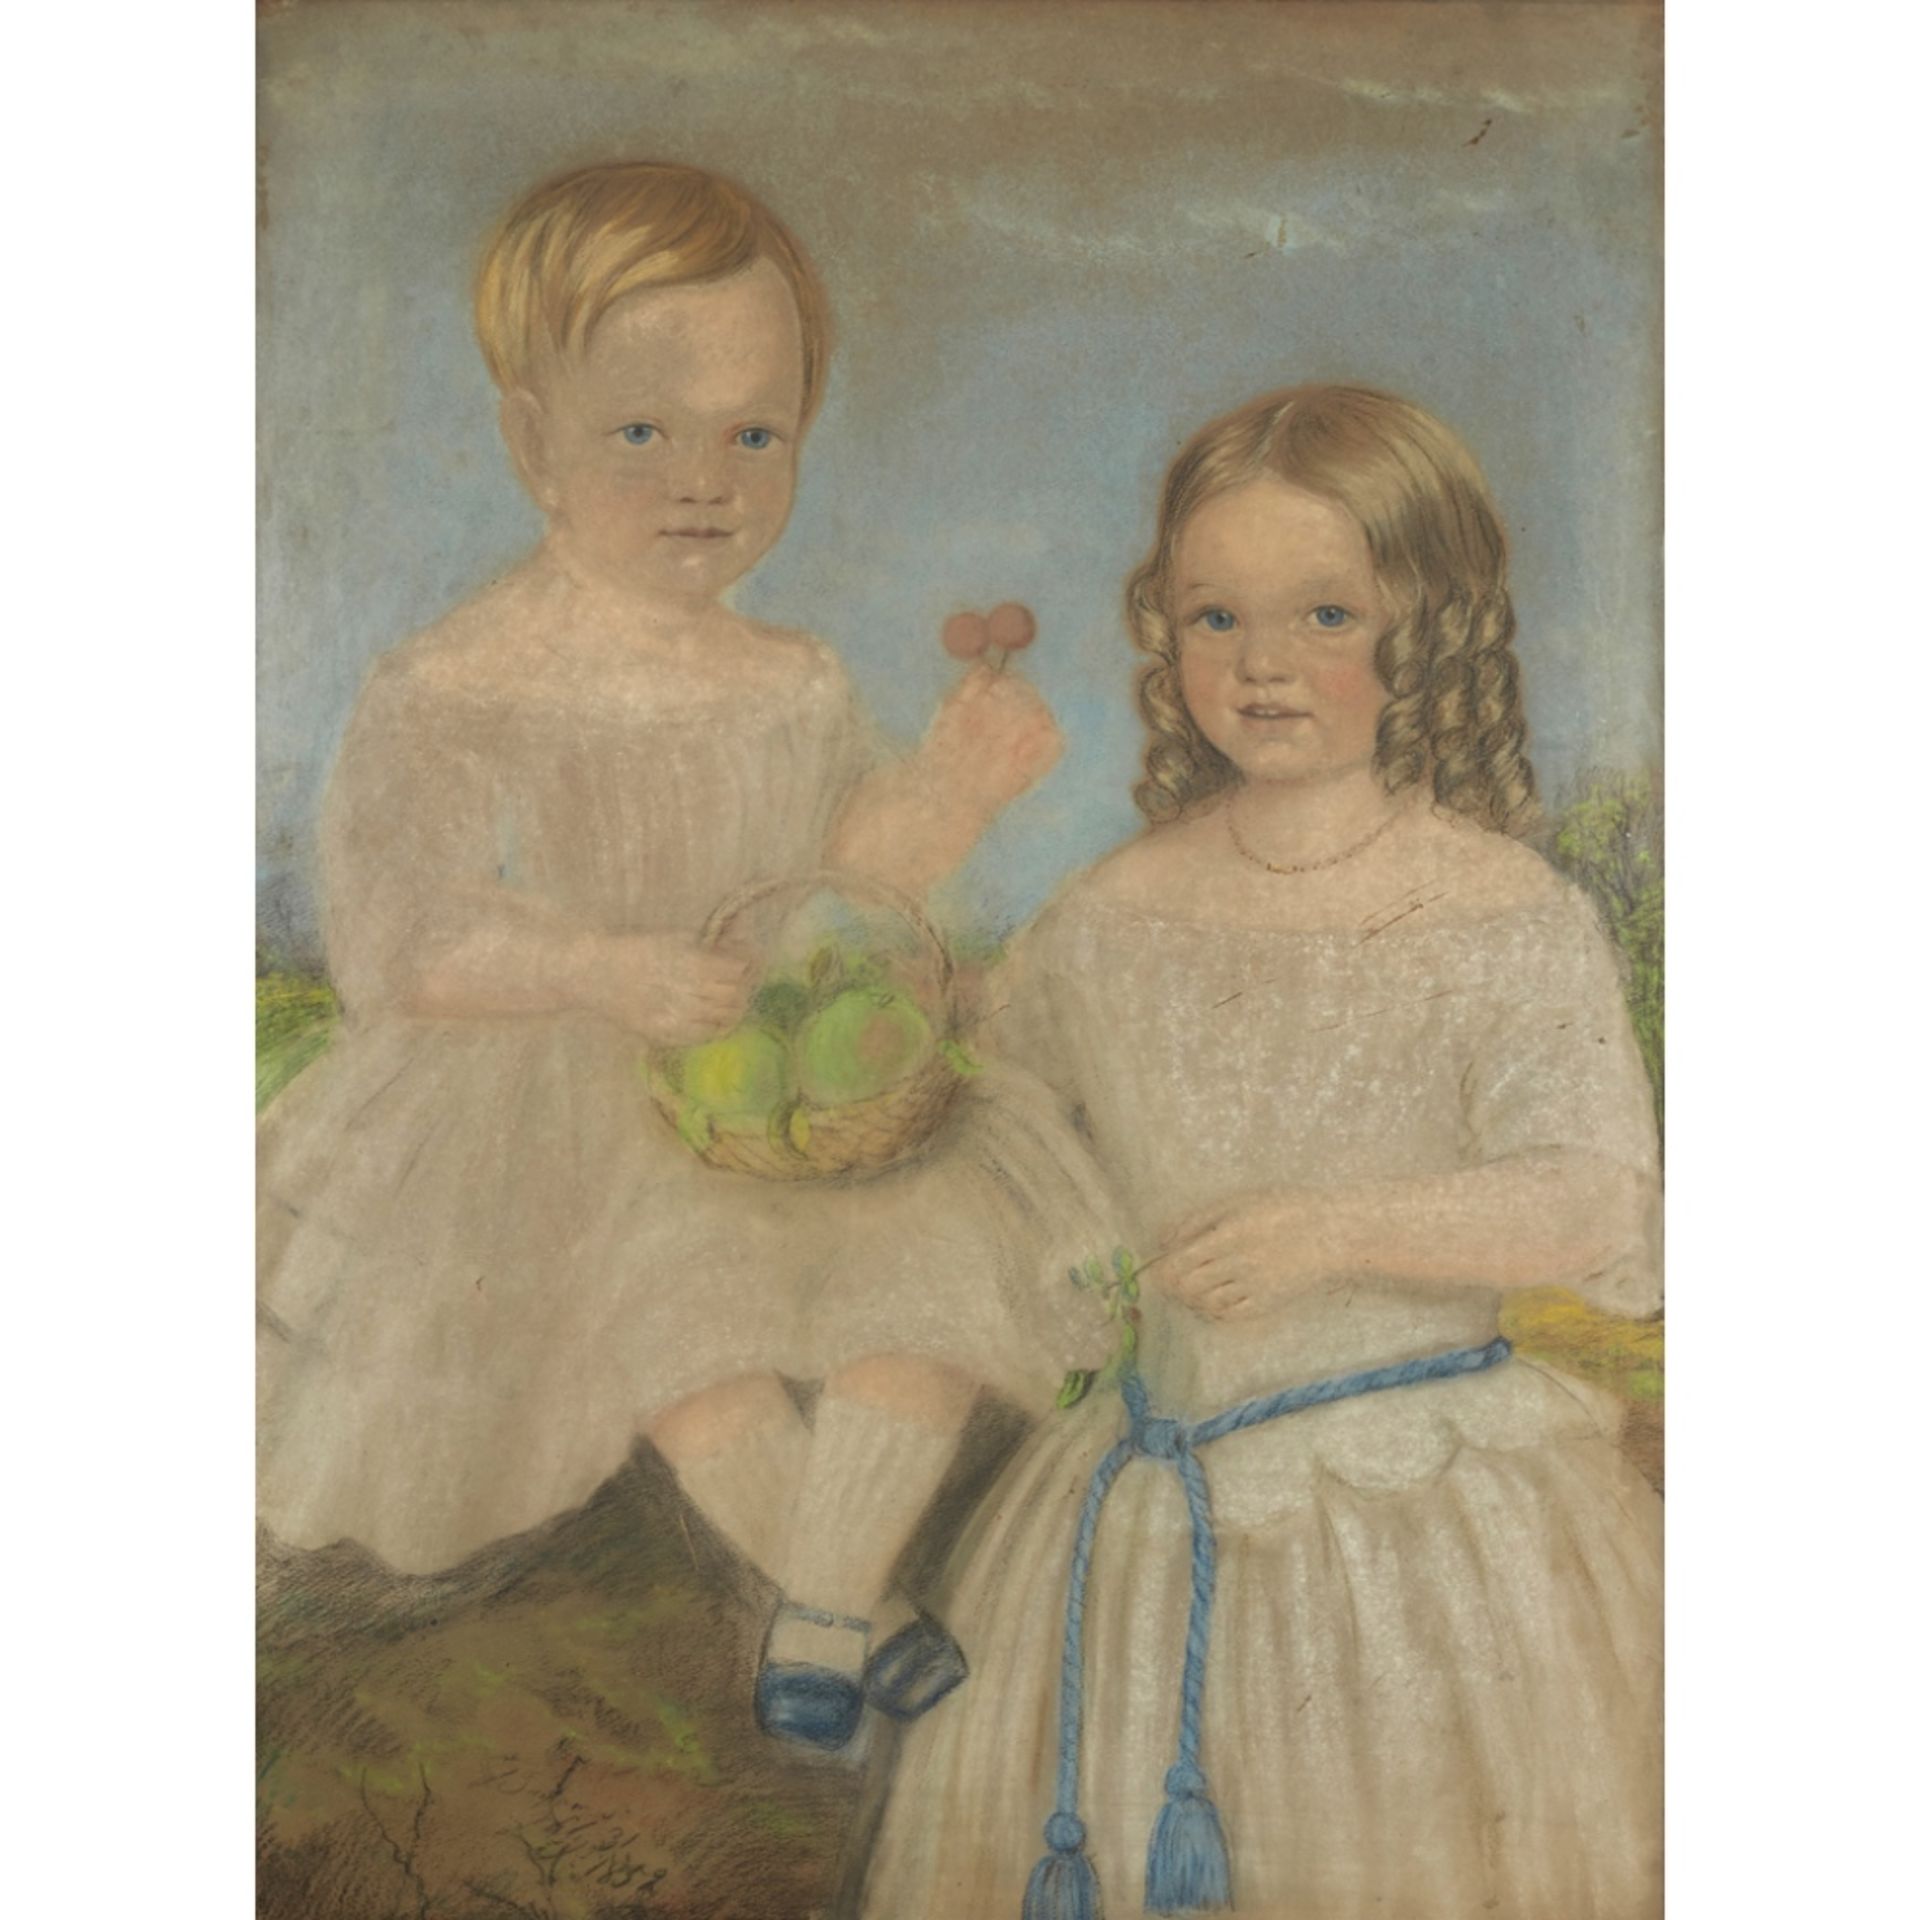 EARLY 19TH CENTURY ENGLISH SCHOOLA GROUP PORTRAIT OF BROTHER AND SISTER Pastel74cm x 54cm (29in x